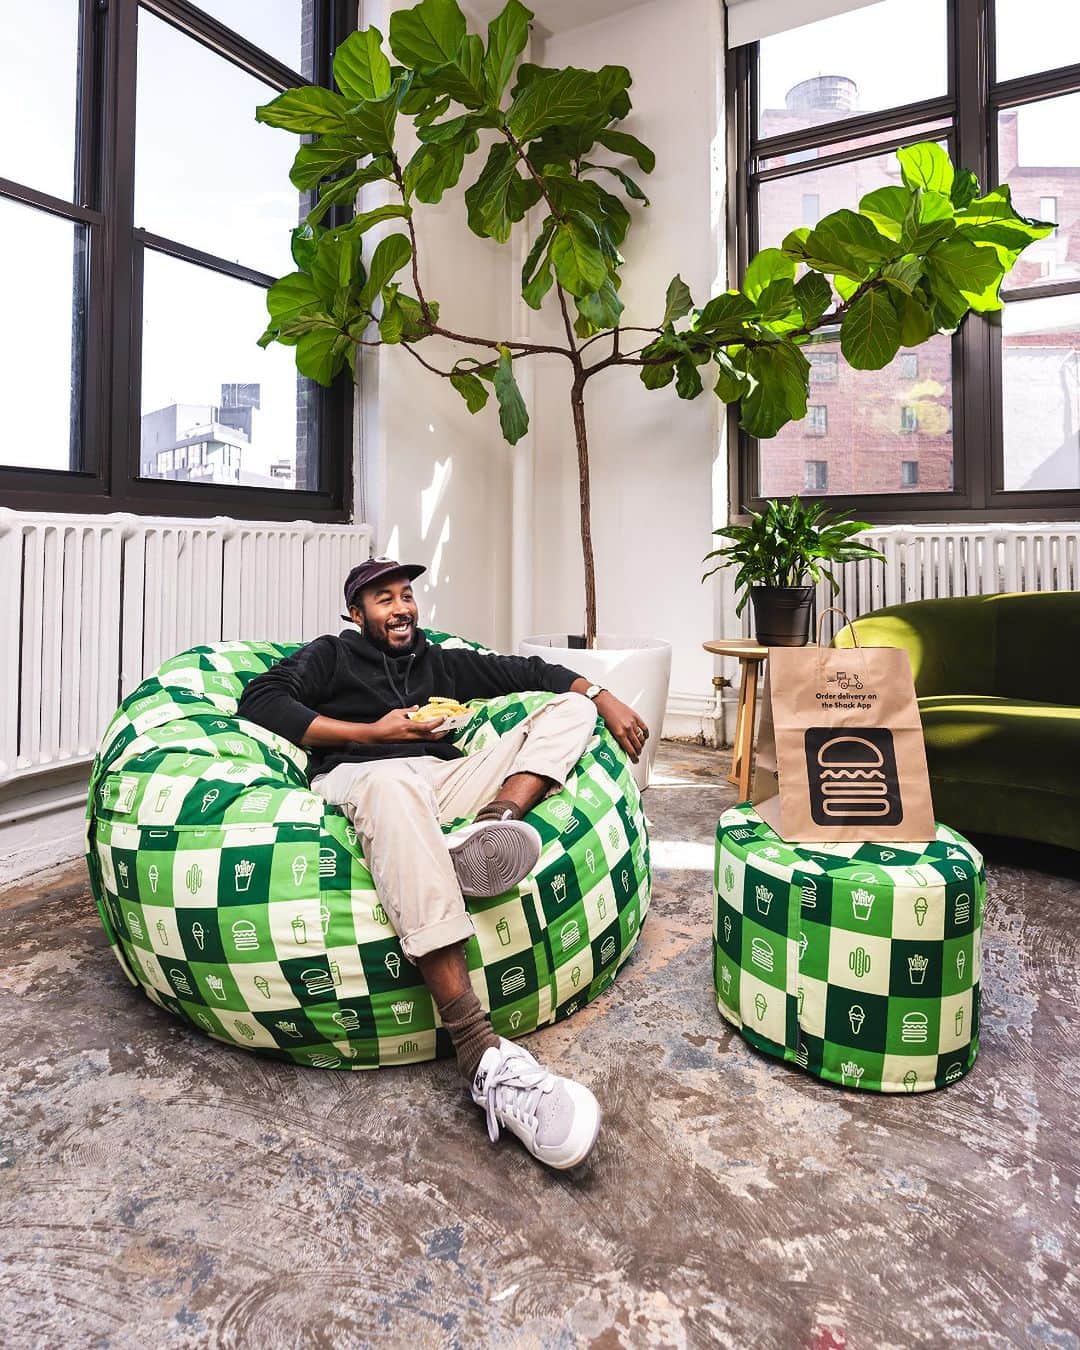 SHAKE SHACKのインスタグラム：「[GIVEAWAY CLOSED. Winners have been notified.]  GIVEAWAY: What happens when you mix up @lovesac and @shakeshack? You accidentally spark the comfiest collab ever.   Swipe to see the Shake Shack x Lovesac MovieSac—complete with a Squattoman to kick your feet up or place your Shack on. We’re giving away one (1) Shake Shack x Lovesac MovieSac + one (1) Shake Shack gift card to five (5) lucky winners.   Rules for entry:  1. Follow @shakeshack and @lovesac  2. Like this post   3. Tag someone you'd want to eat Shake Shack on a Lovesac with.   Link in bio for official giveaway terms and conditions.」